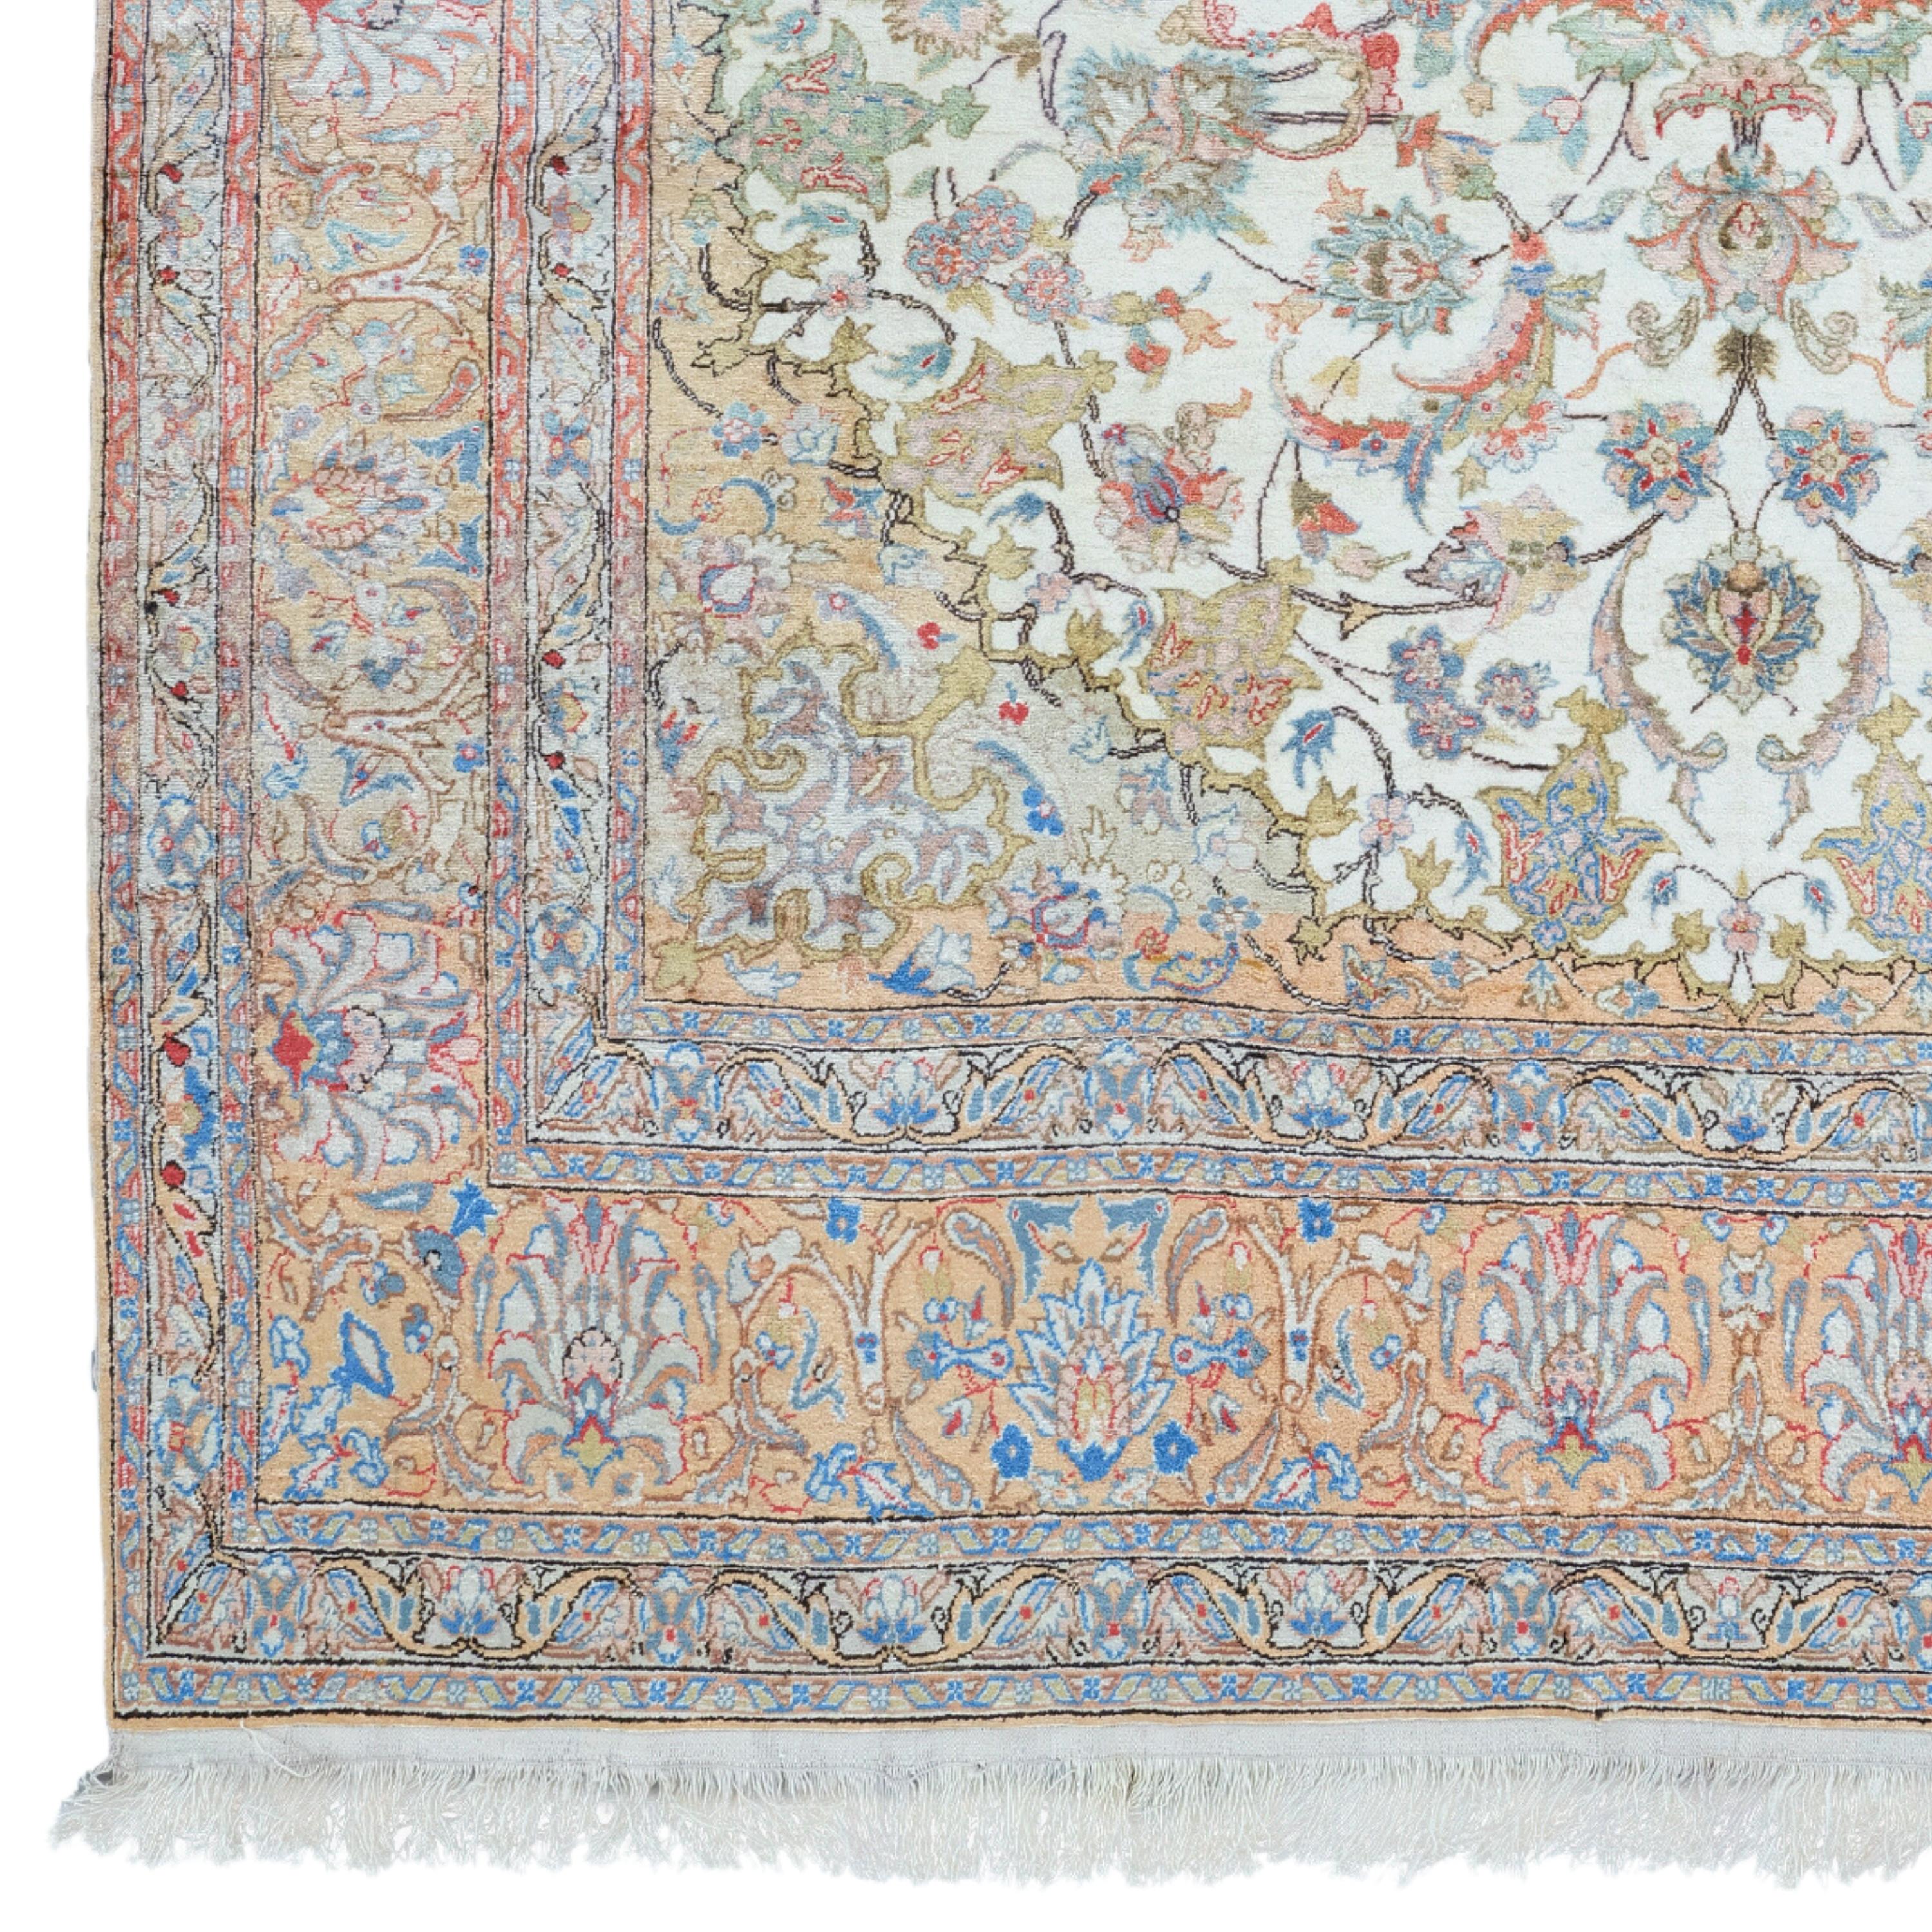 20th Century Kayseri Silk Carpet - Vintage Turkish Silk Carpet

This particular 20th century vintage silk Kayseri rug stands out with its rich color palette and intricate patterns surrounded by a central medallion design. An appreciation for antique